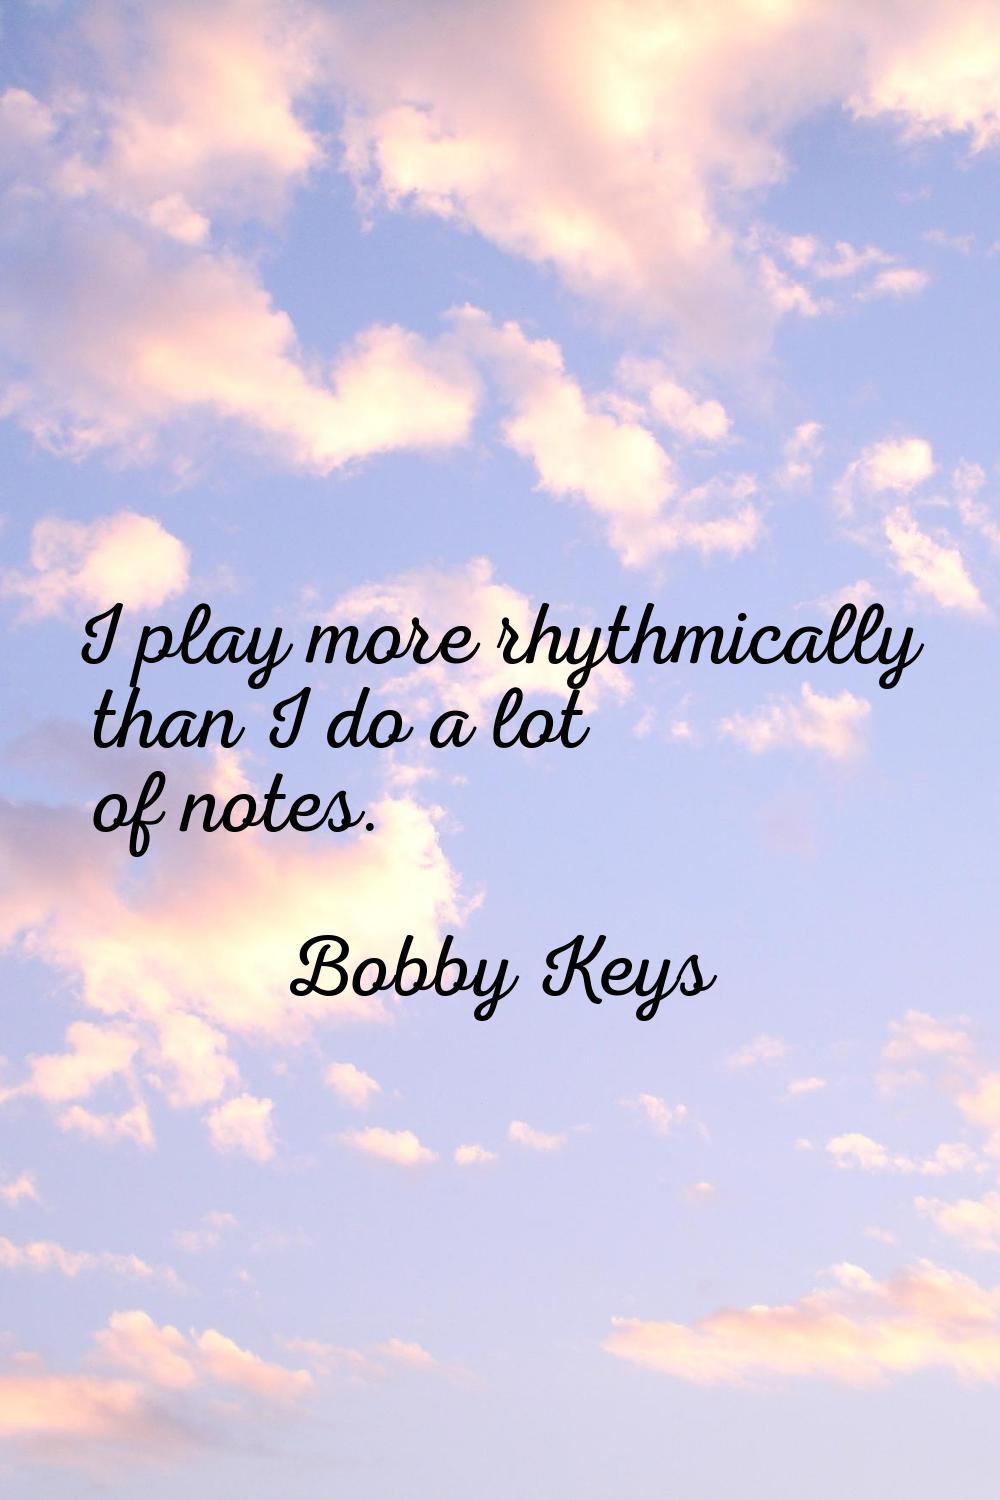 I play more rhythmically than I do a lot of notes.